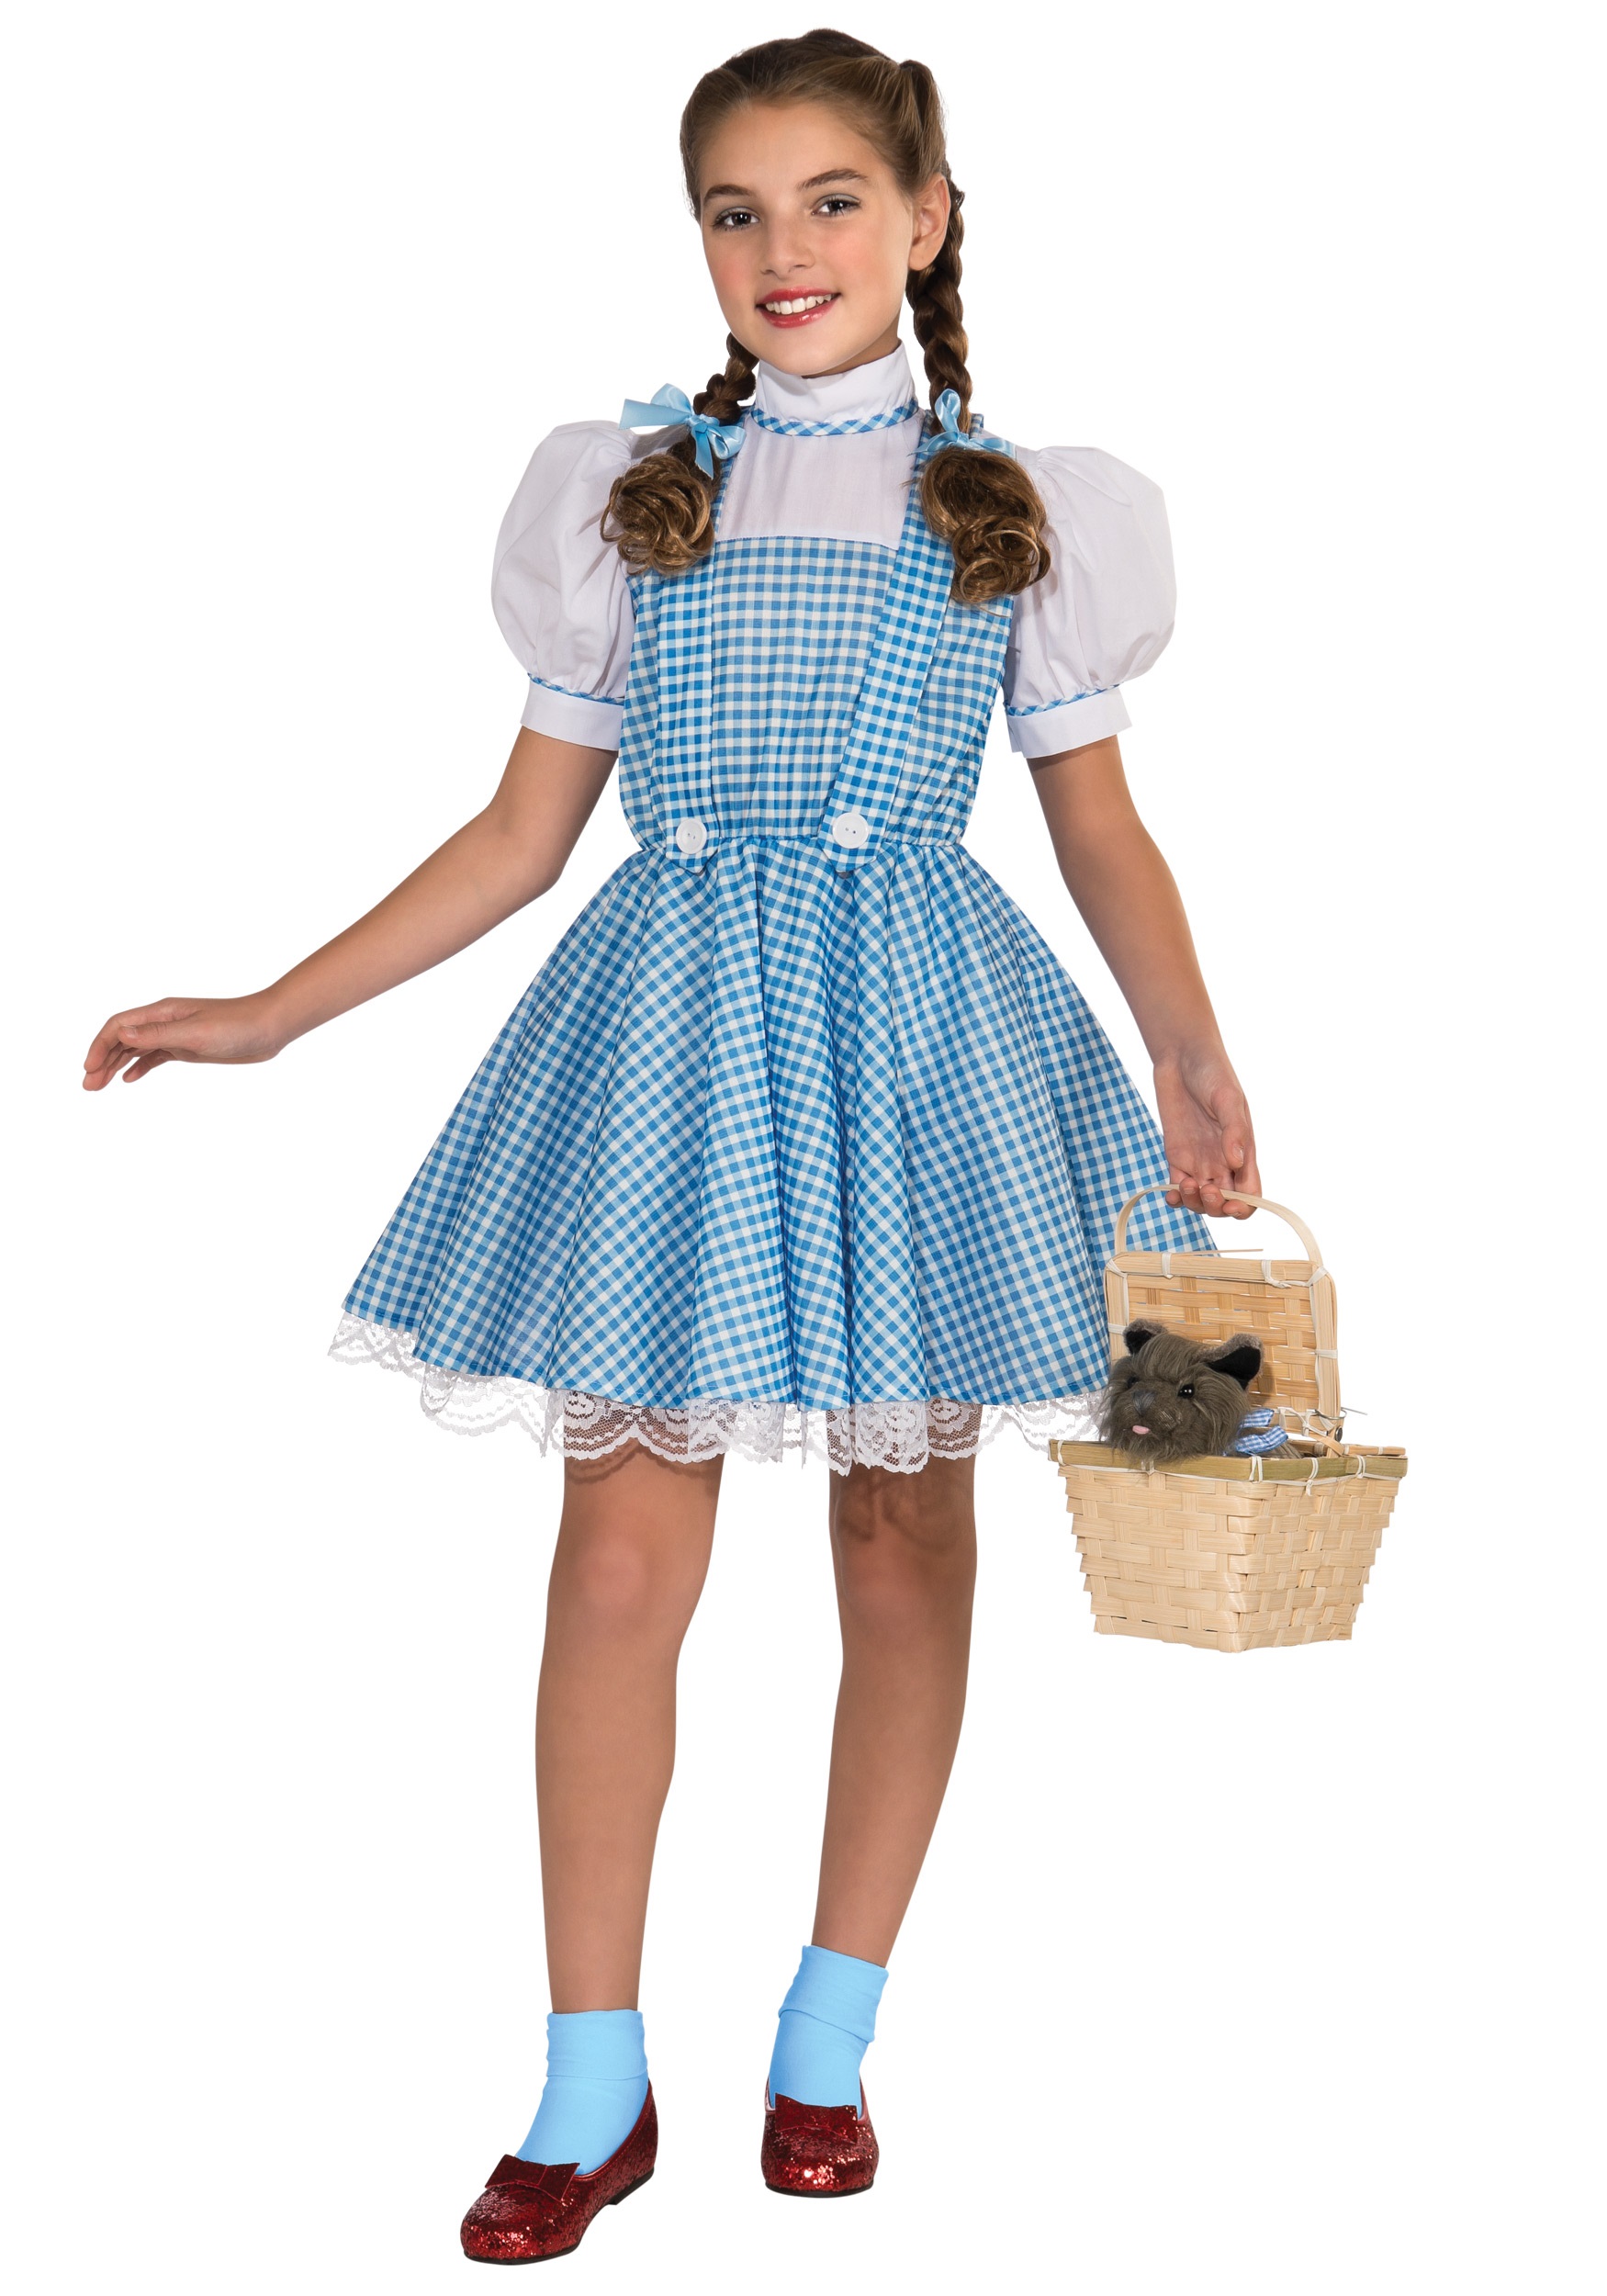 Photos - Fancy Dress Rubies Costume Co. Inc Deluxe Dorothy Costume for Girls Blue RU886494 